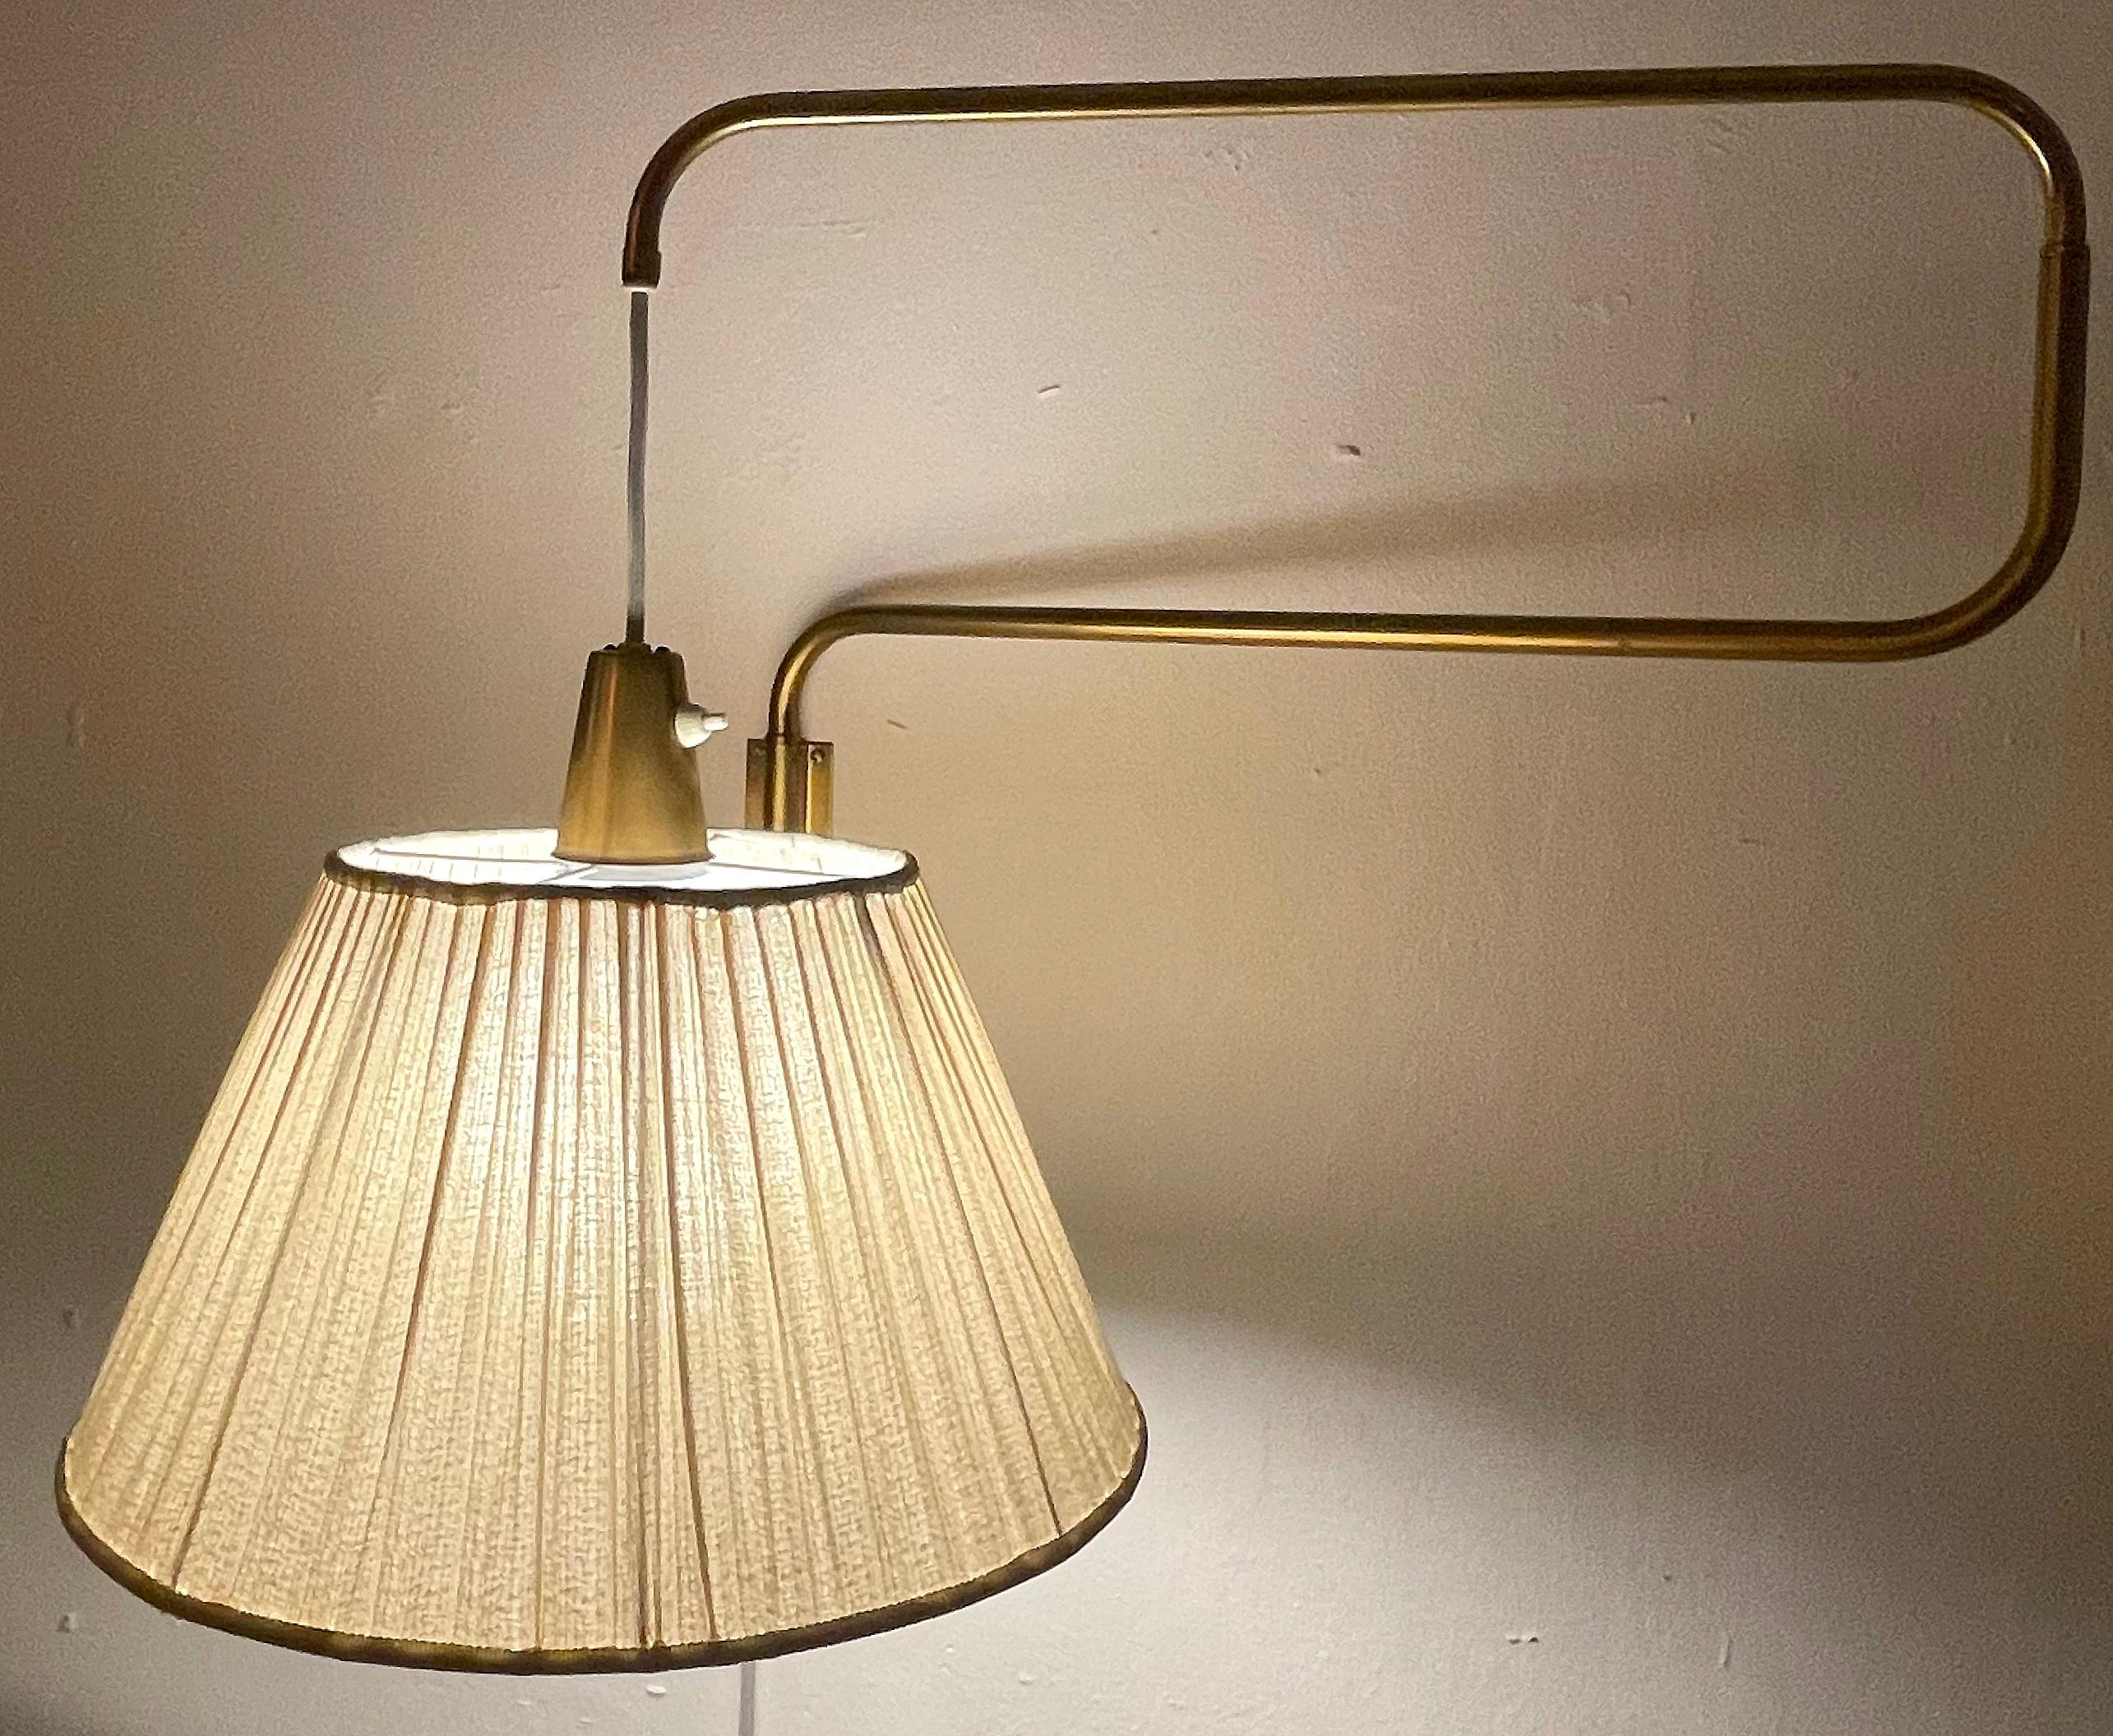 Rare wall lamp attributed to Hans Bergström. Produced during the 1950s by ASEA Belysning with model number E2105. Double brass lamp arm that easily adjusts and can be sprawled. The new, white chord can also be raised or lowered after preference.